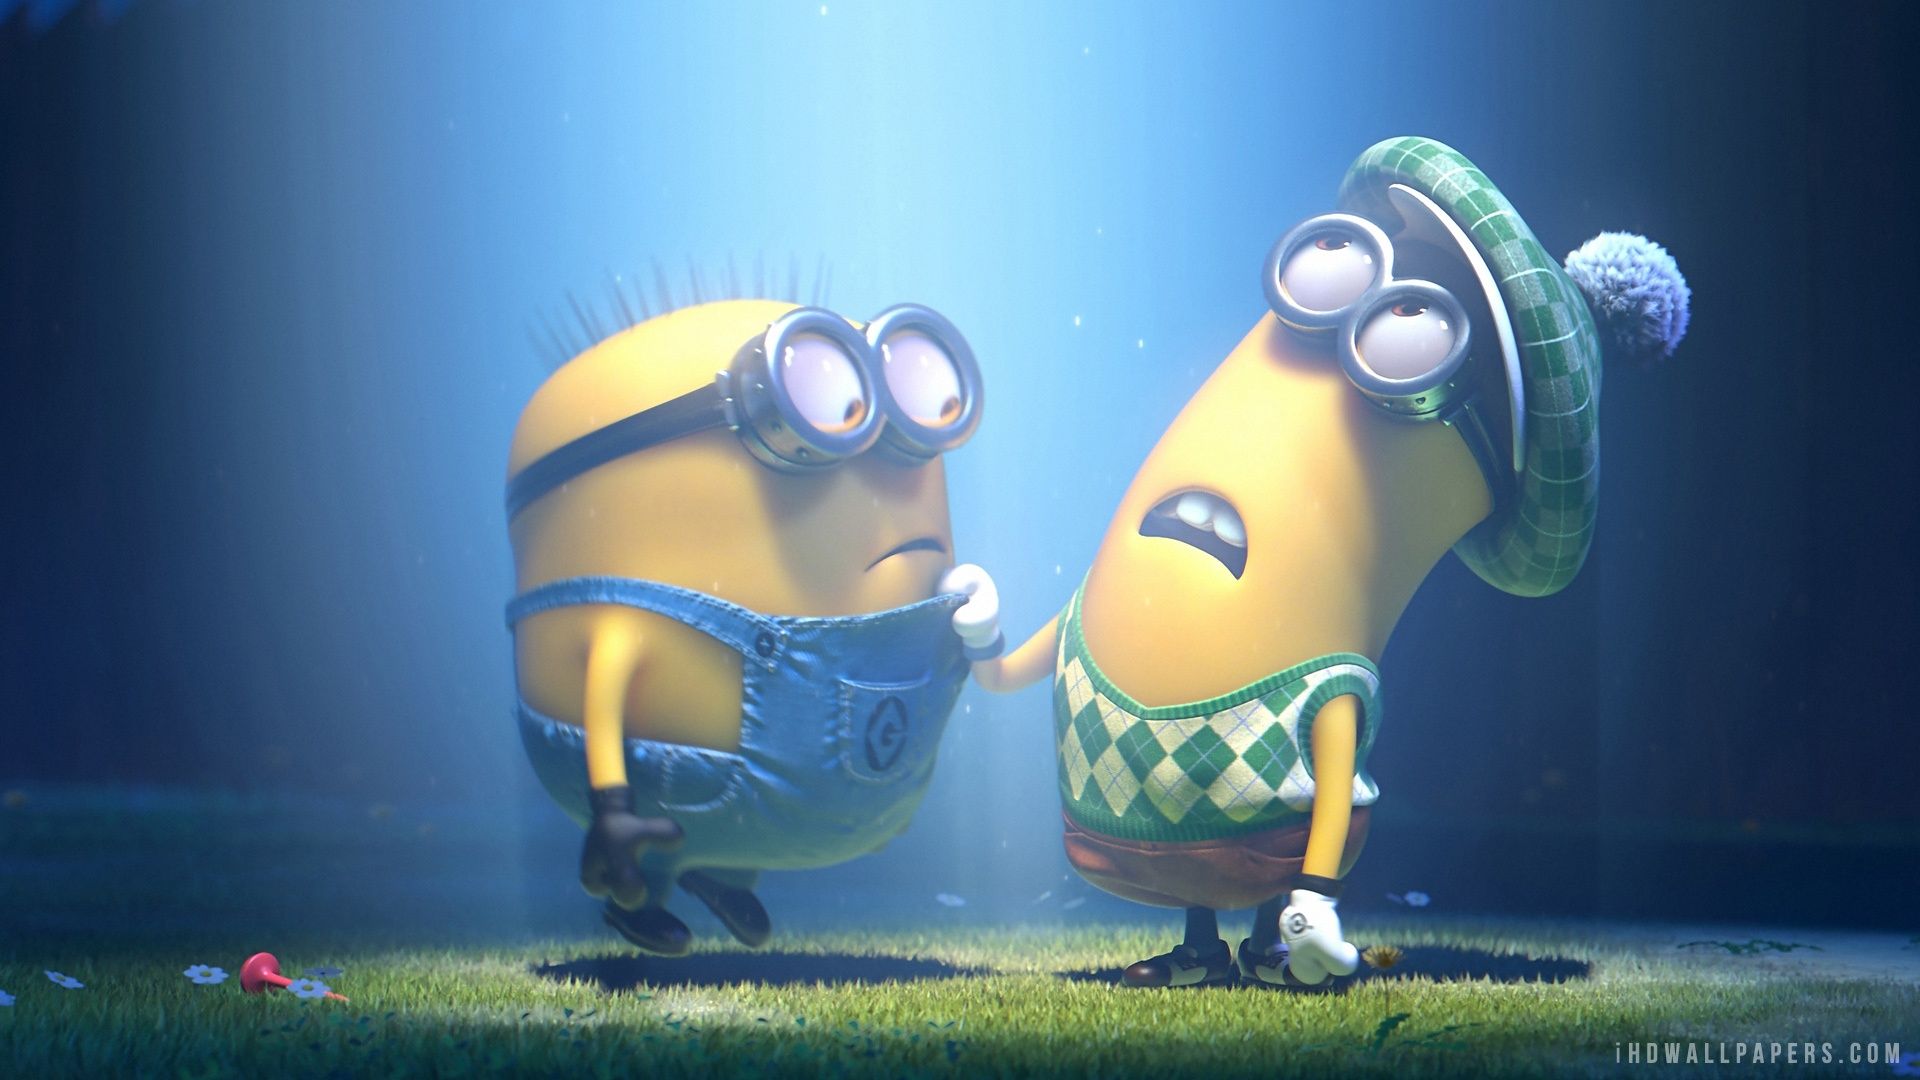 Minions Despicable Me 2 HD Wallpaper - iHD Wallpapers